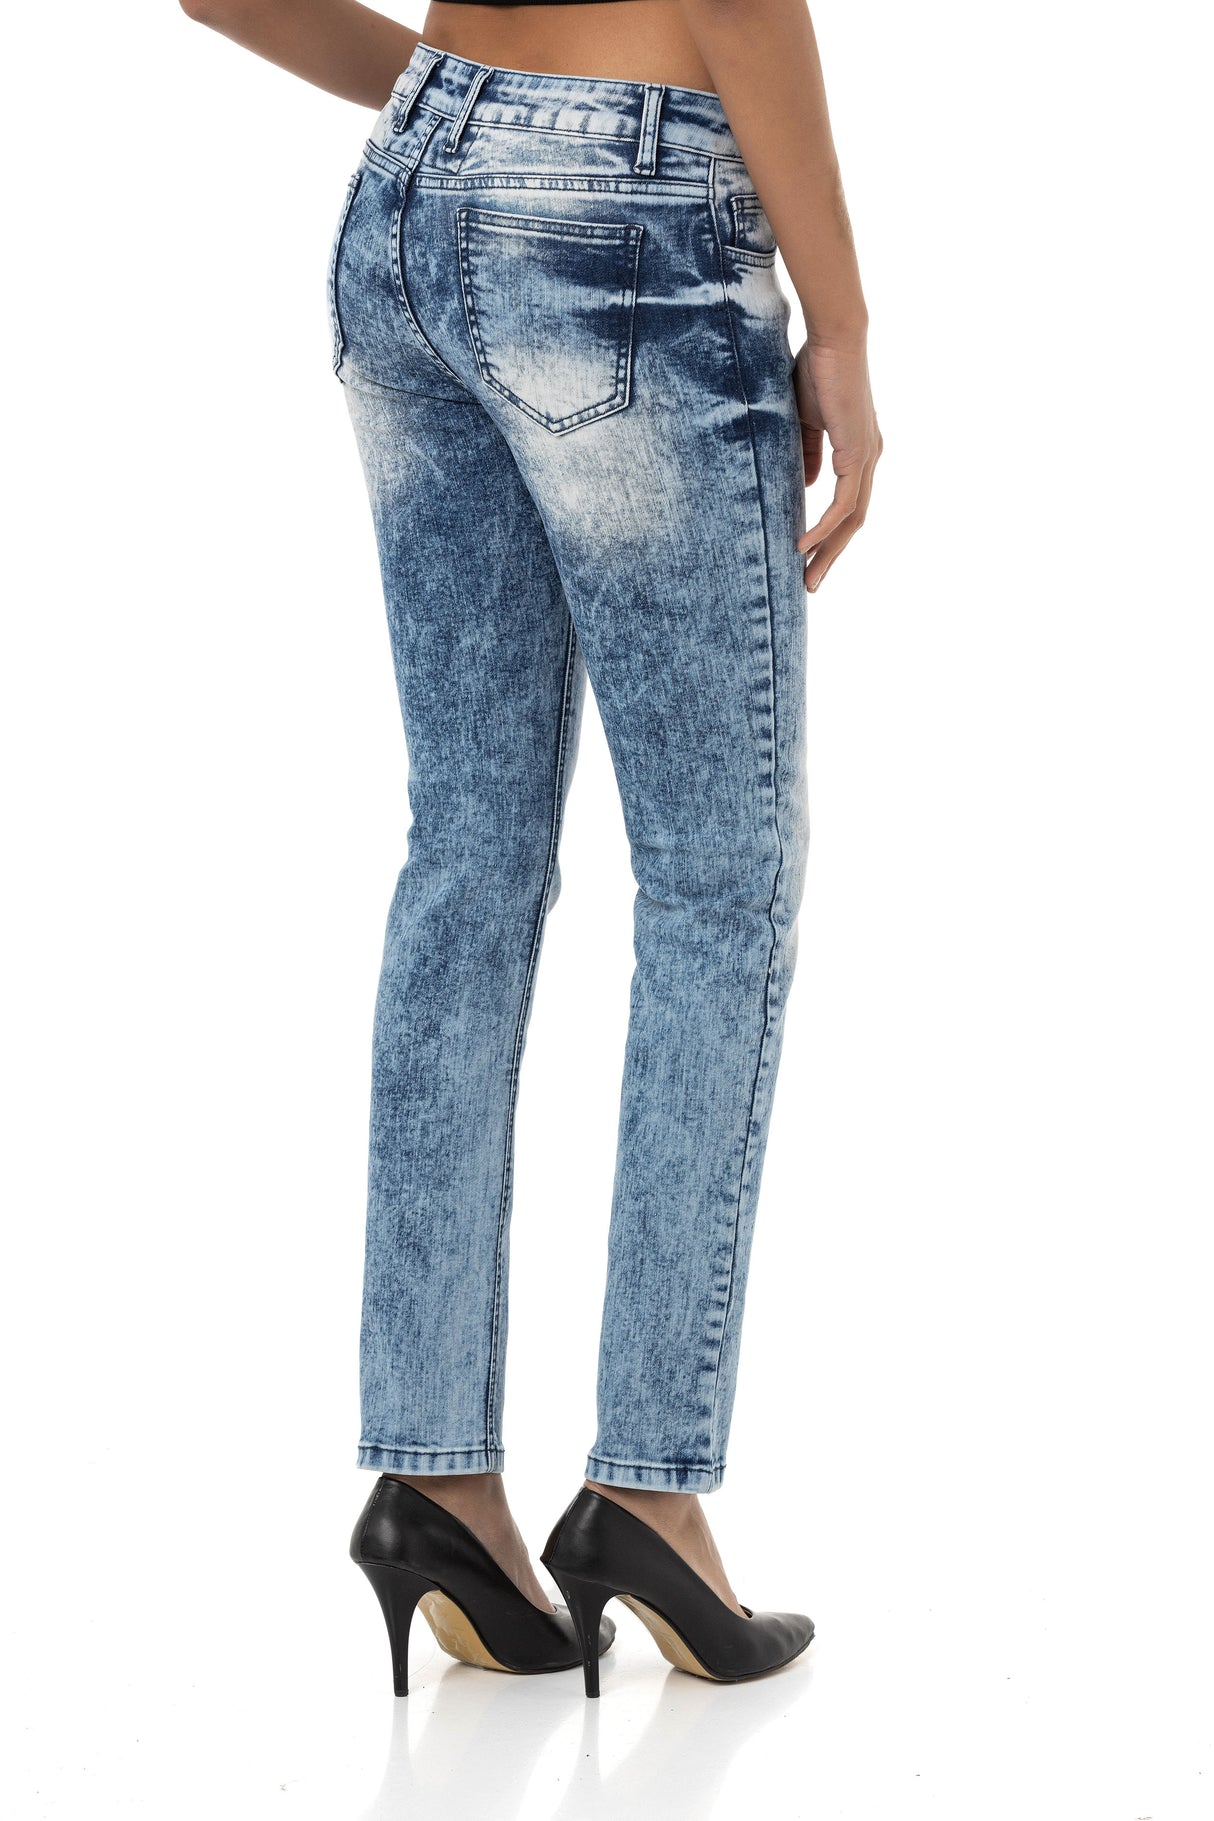 WD459 Donne jeans slim-fit in un look moderno